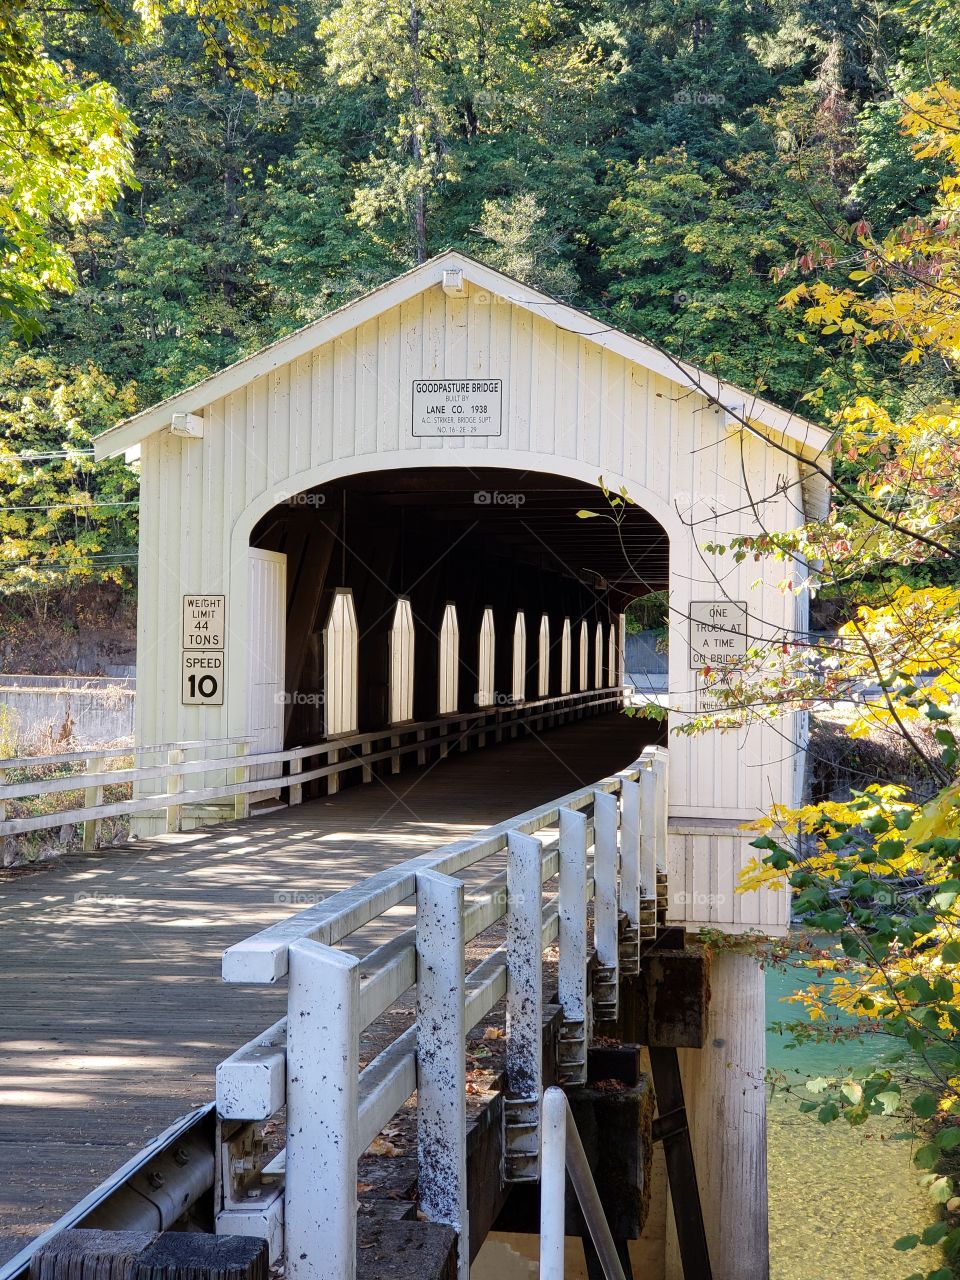 The old covered Goodpasture Bridge built in 1938 near Vida in Western Oregon on a sunny autumn day with lots of fall color around it.